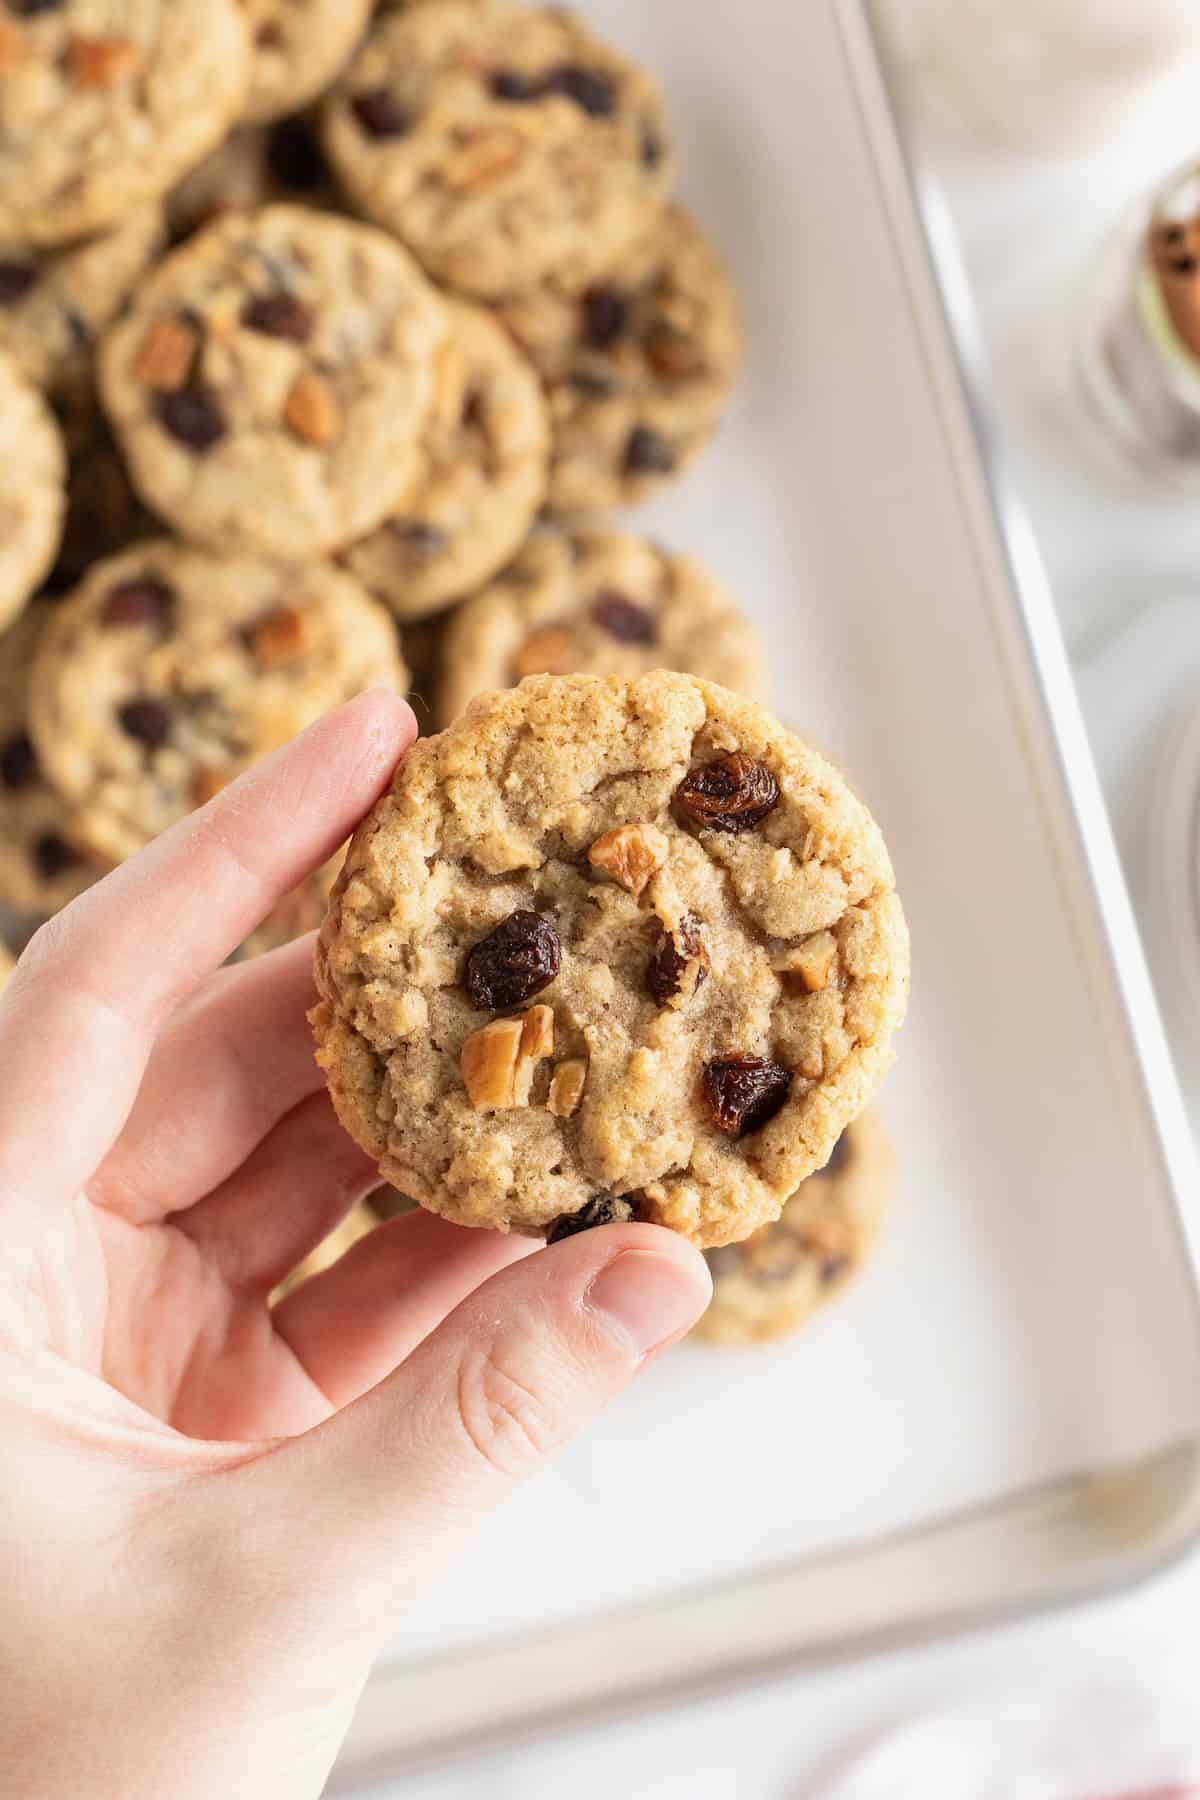 A hand holding an oatmeal raisin cookie with pecans over a parchment lined aluminum baking sheet full of cookies.